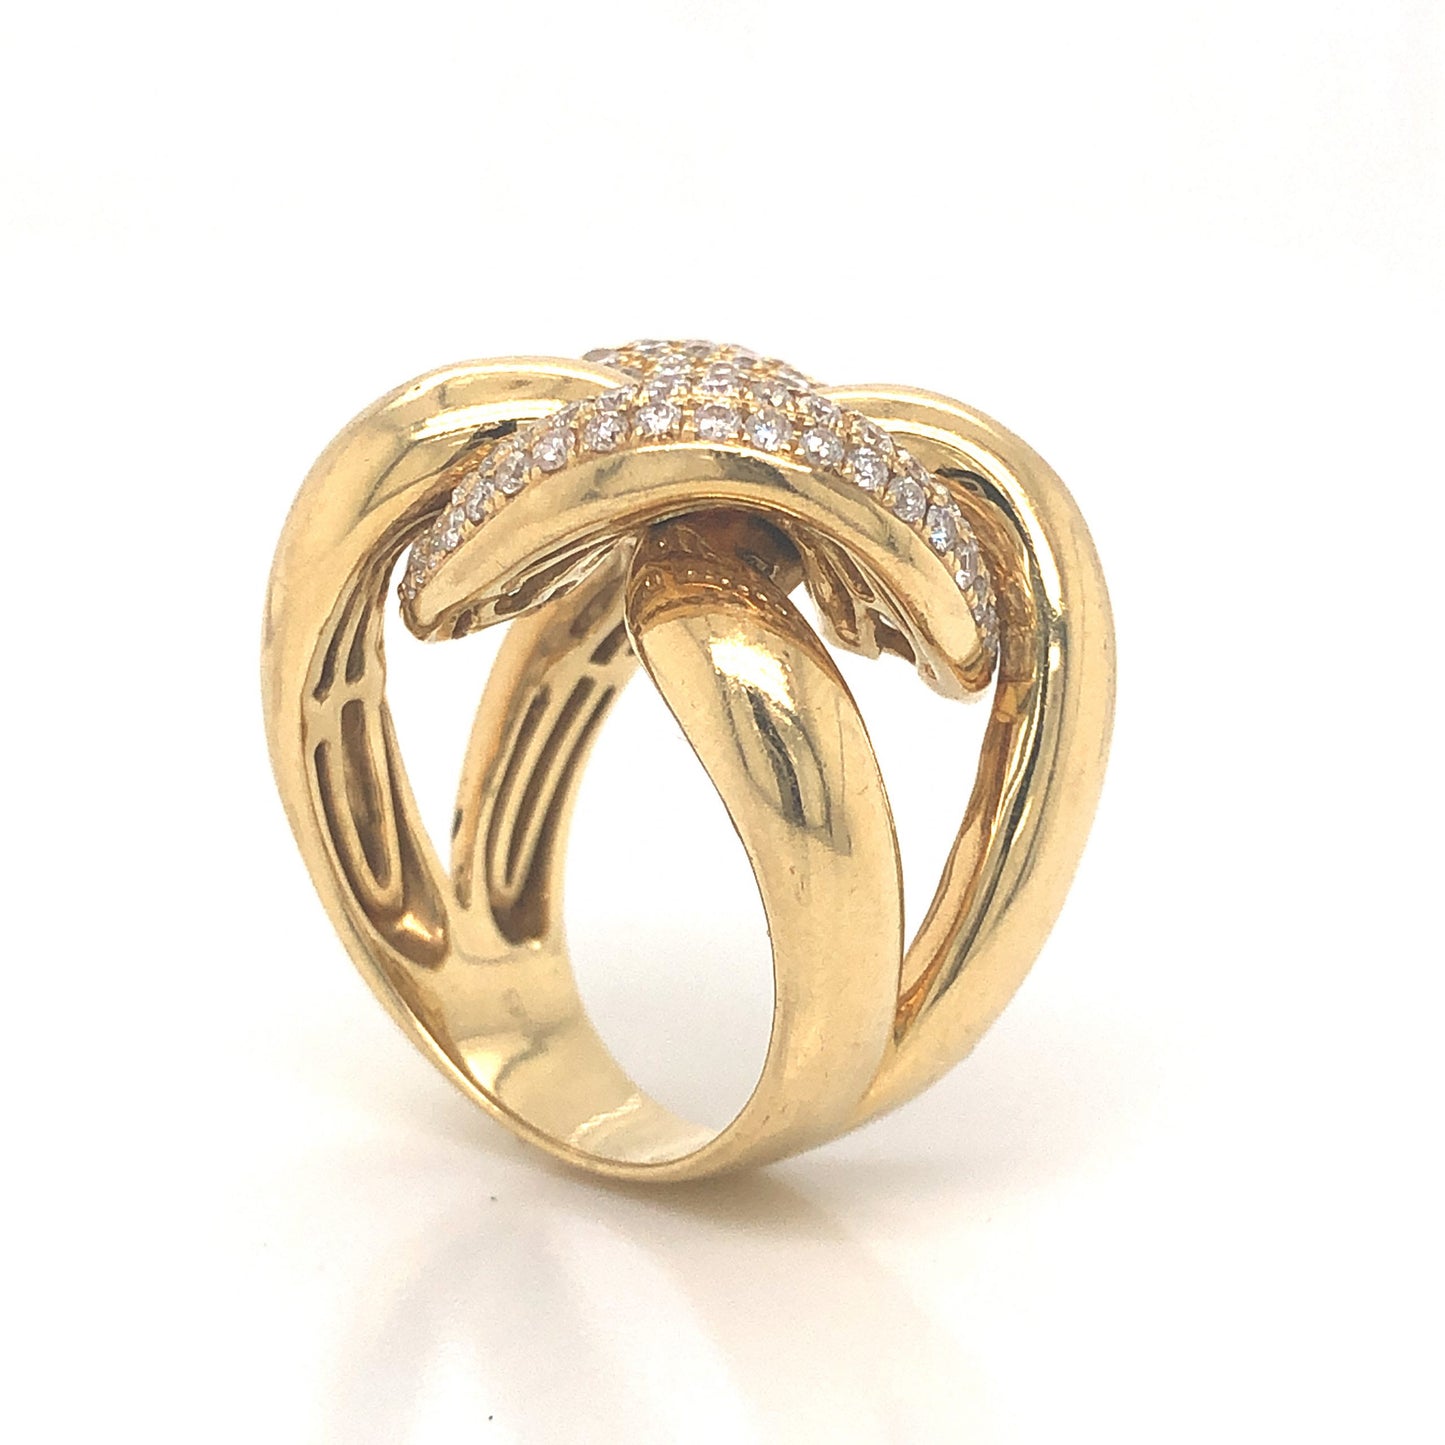 Pave Diamond Knot Cocktail Ring 18k Yellow Gold